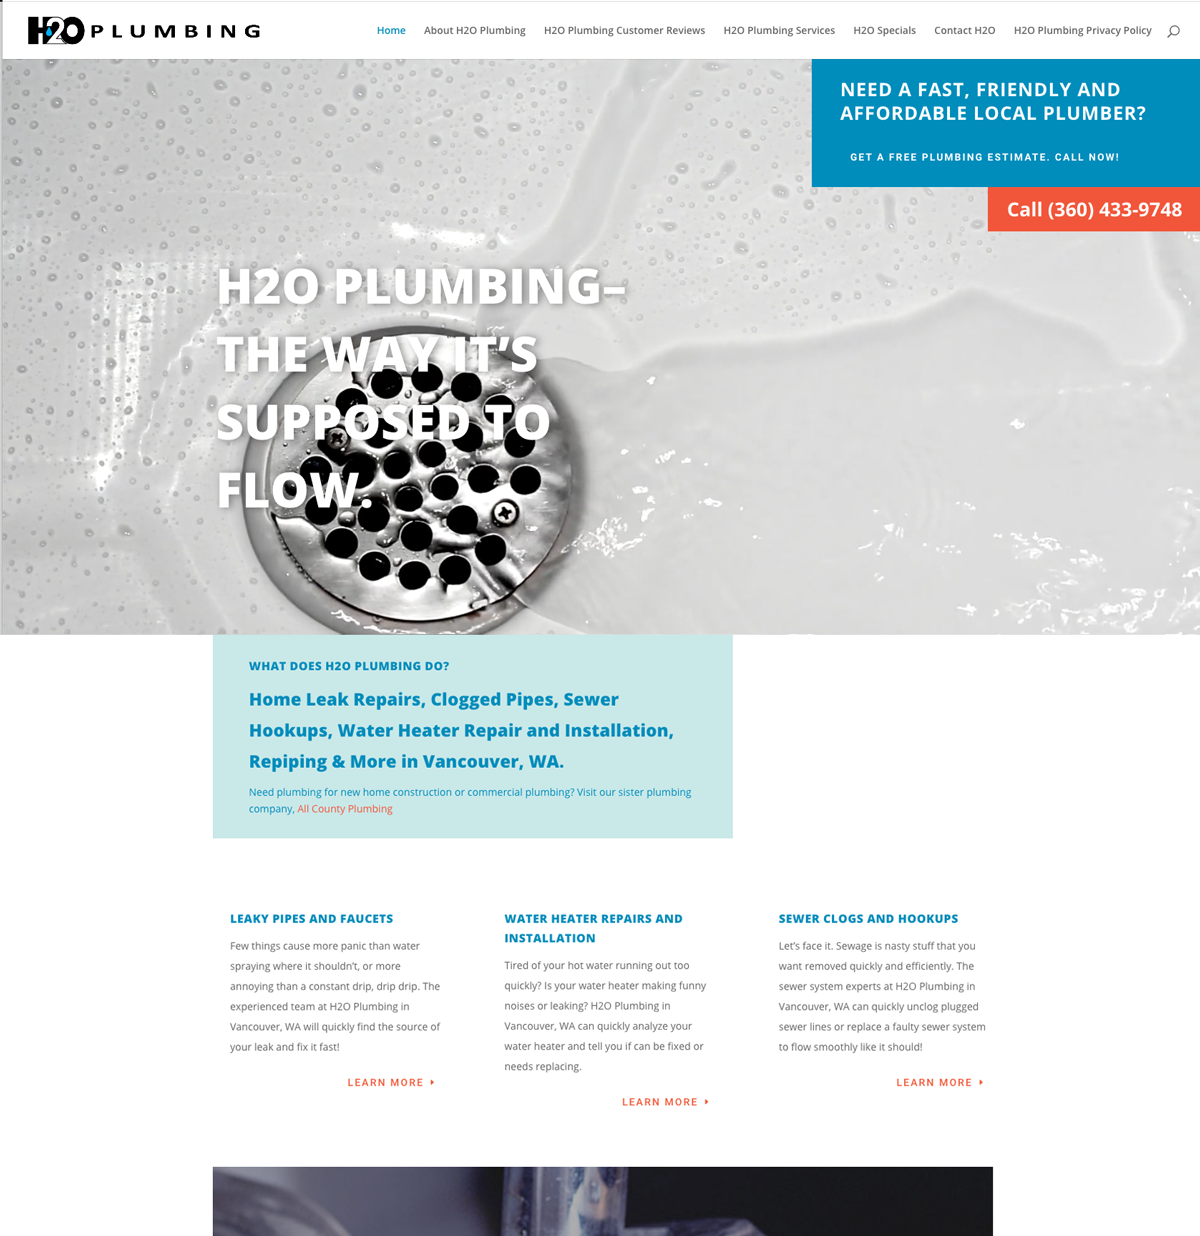 Web Site Design for H2O Plumbing by Eric Savage of Savage Creative